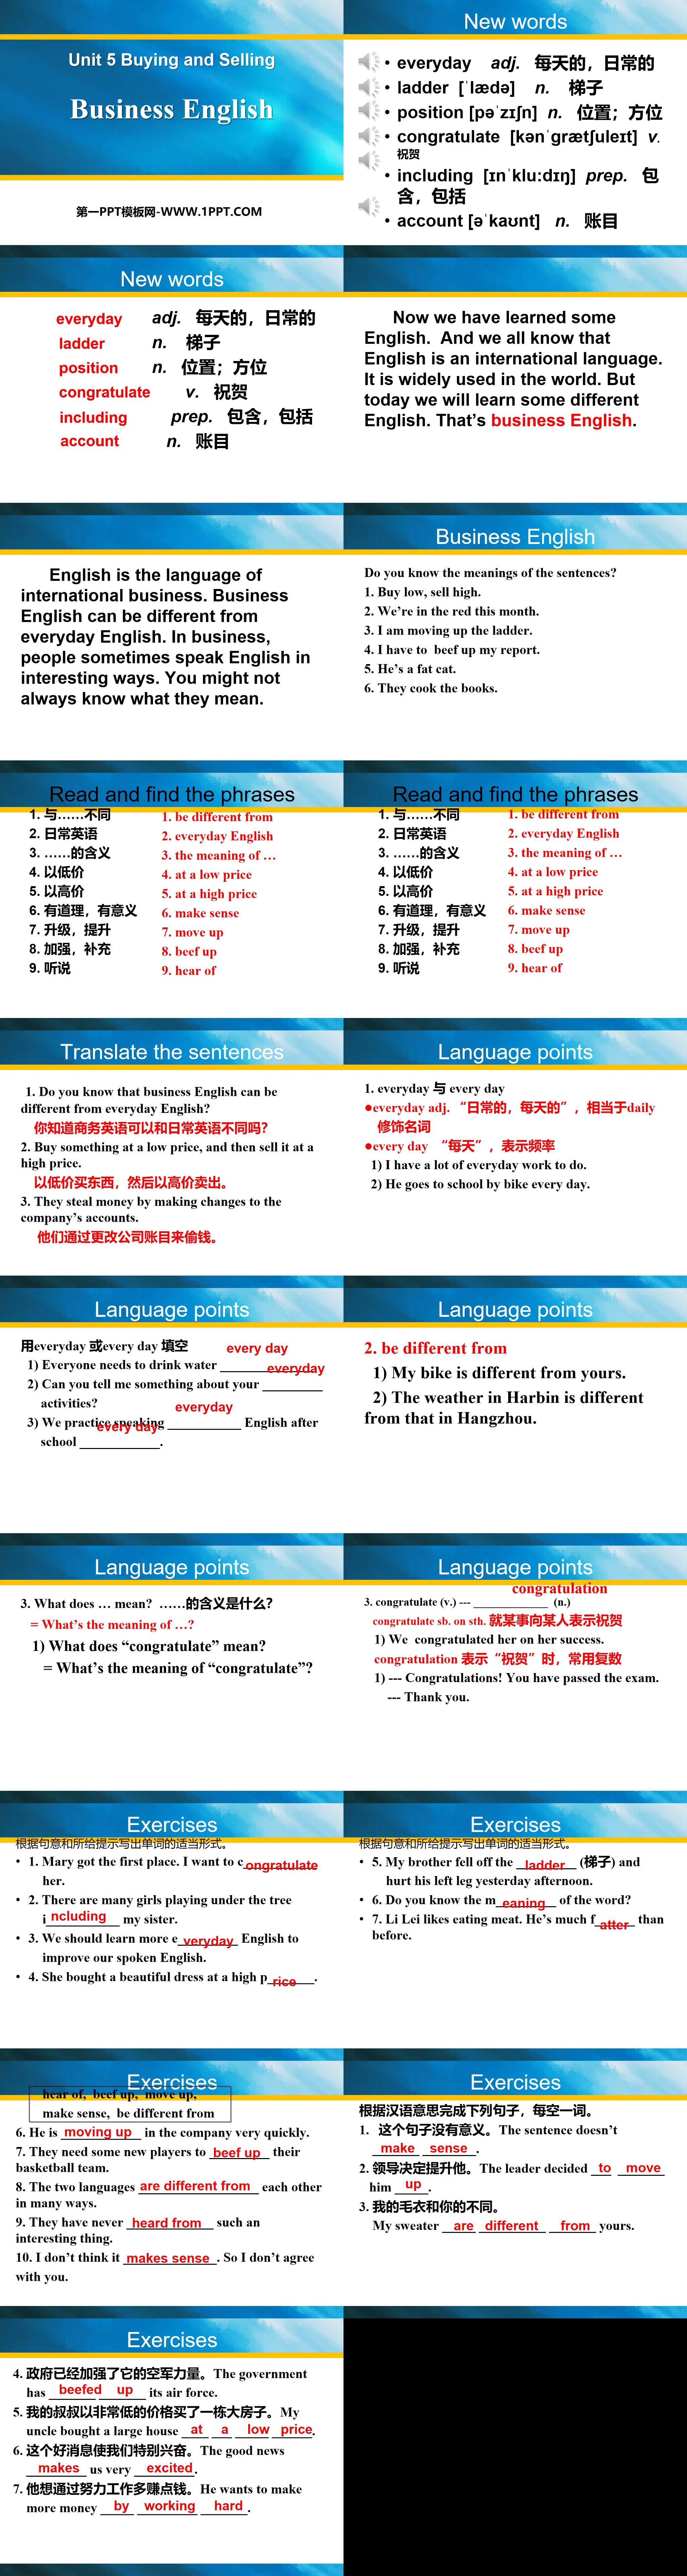 《Business English》Buying and Selling PPT课件
（2）